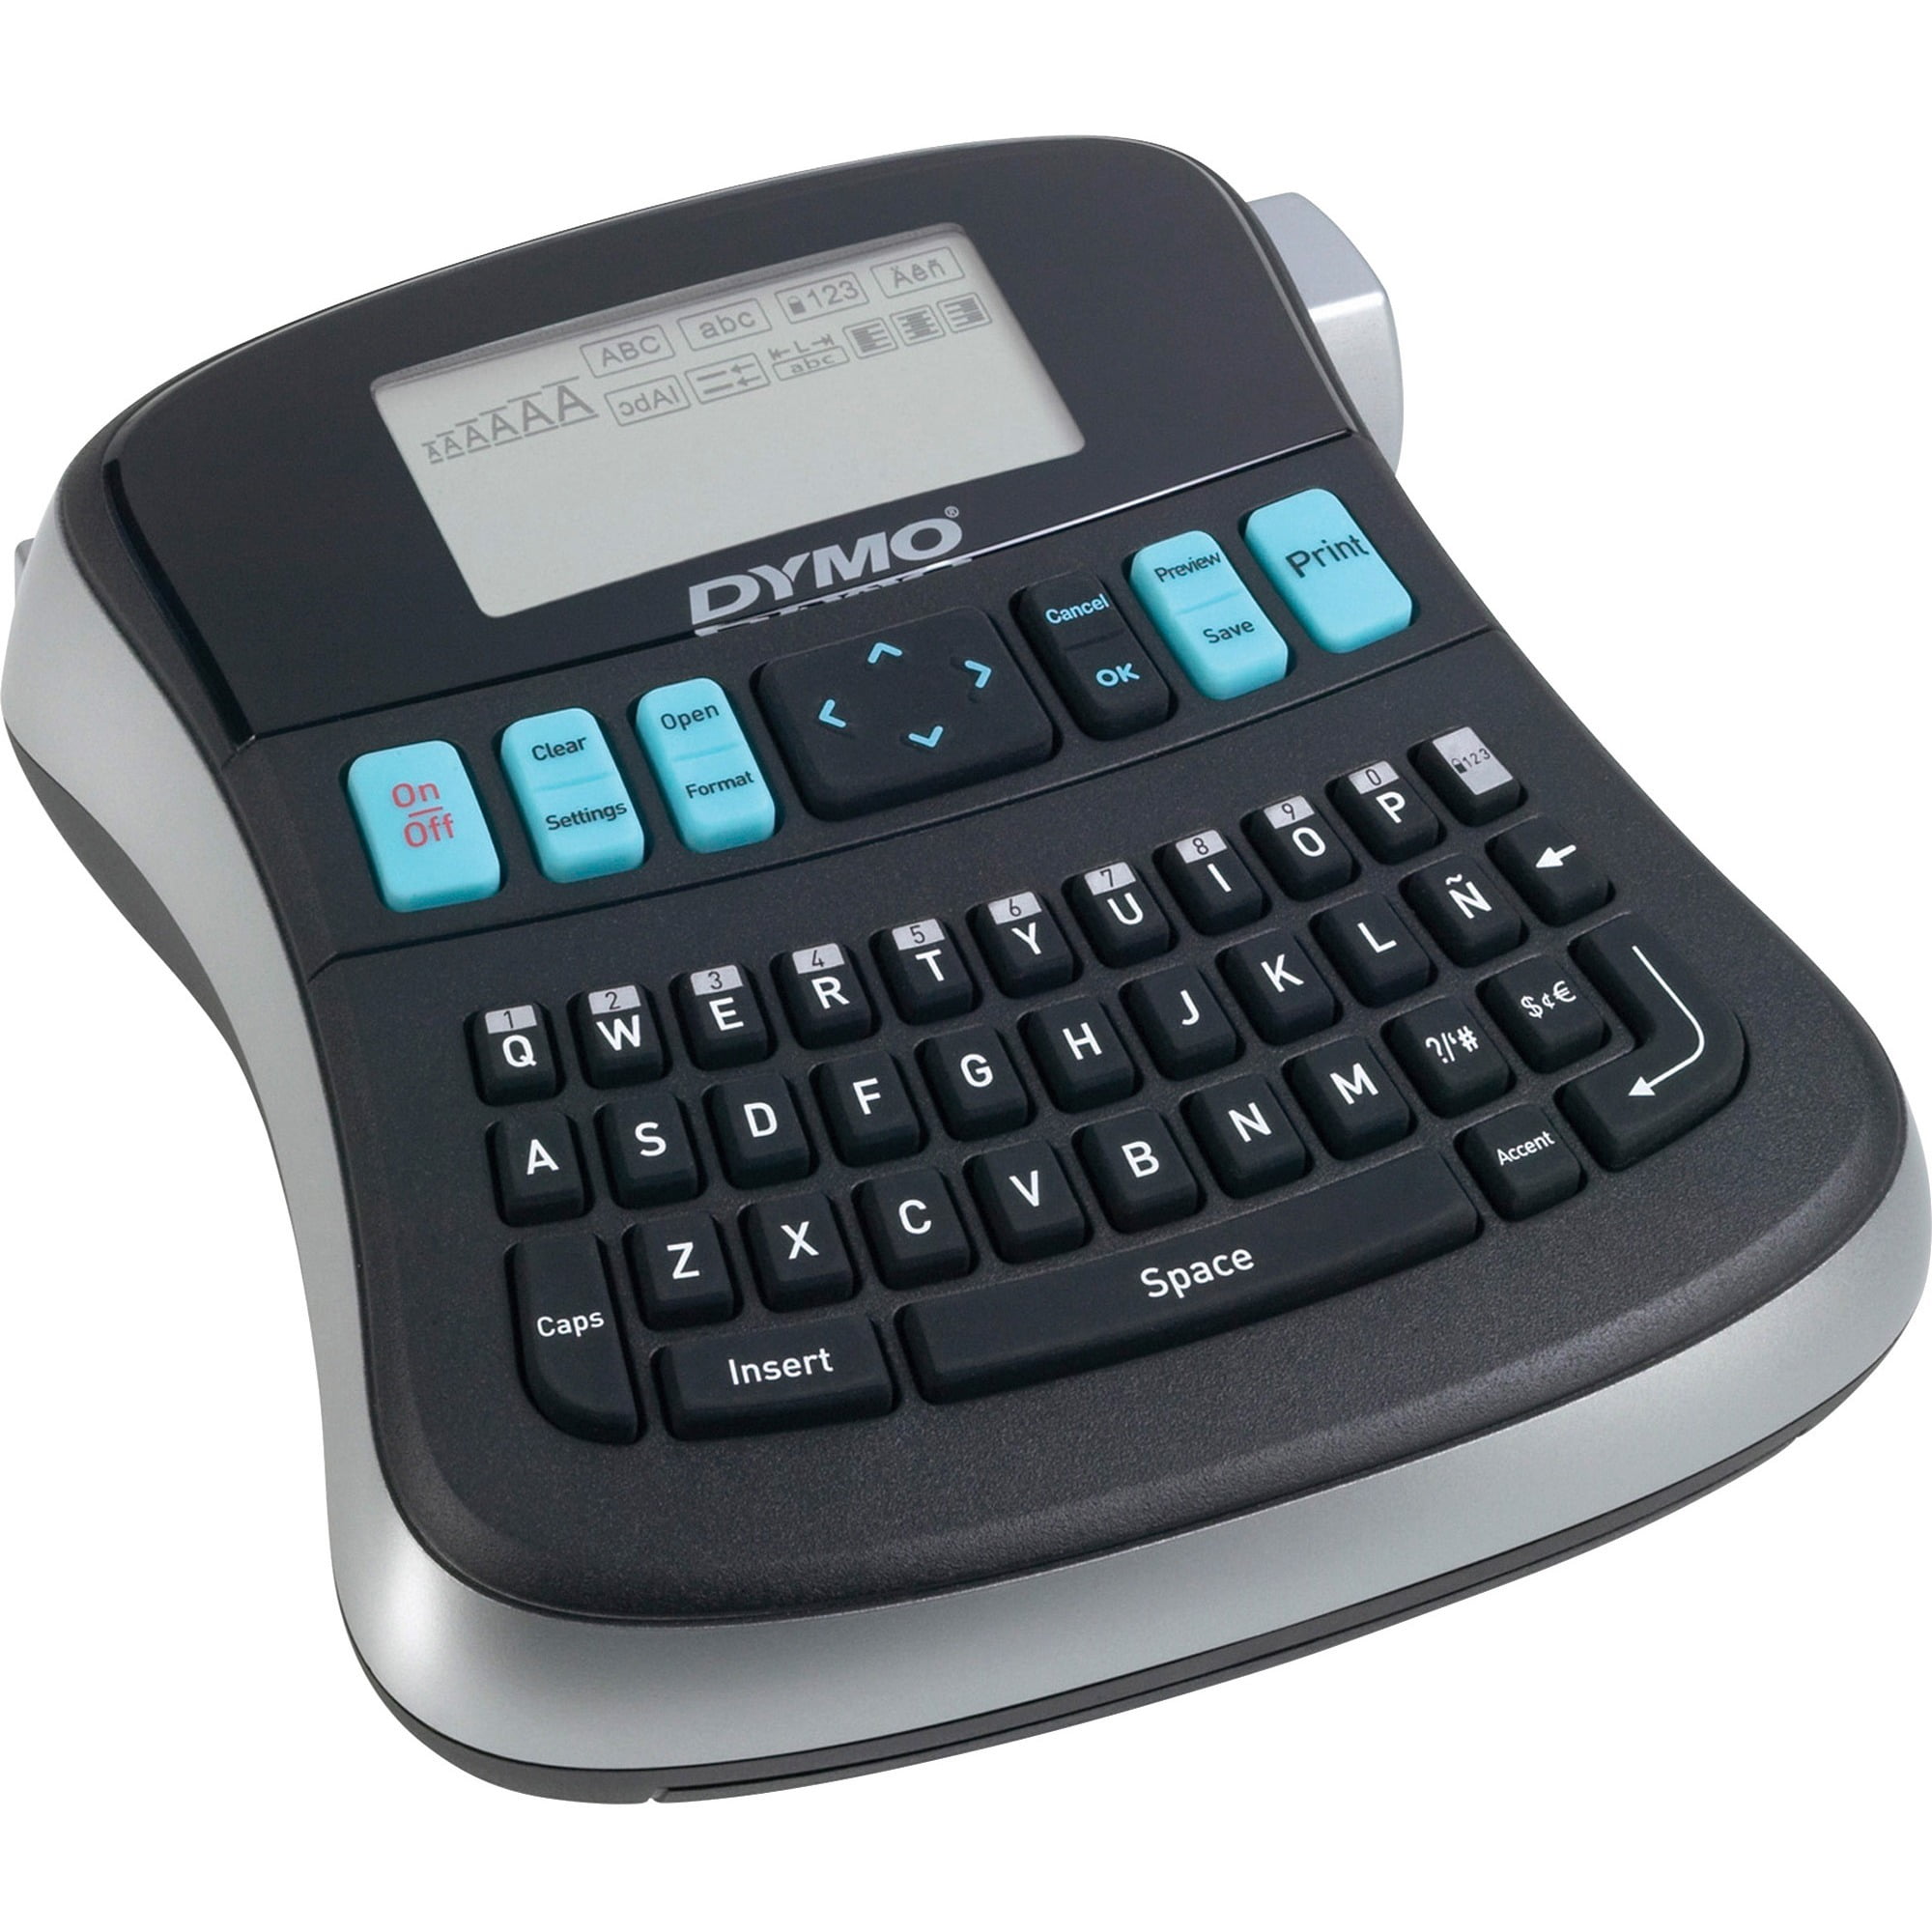 DYMO Label Maker LabelManager 160 Portable Label Maker, Easy-to-Use,  One-Touch Smart Keys, QWERTY Keyboard, Large Display, for Home & Office